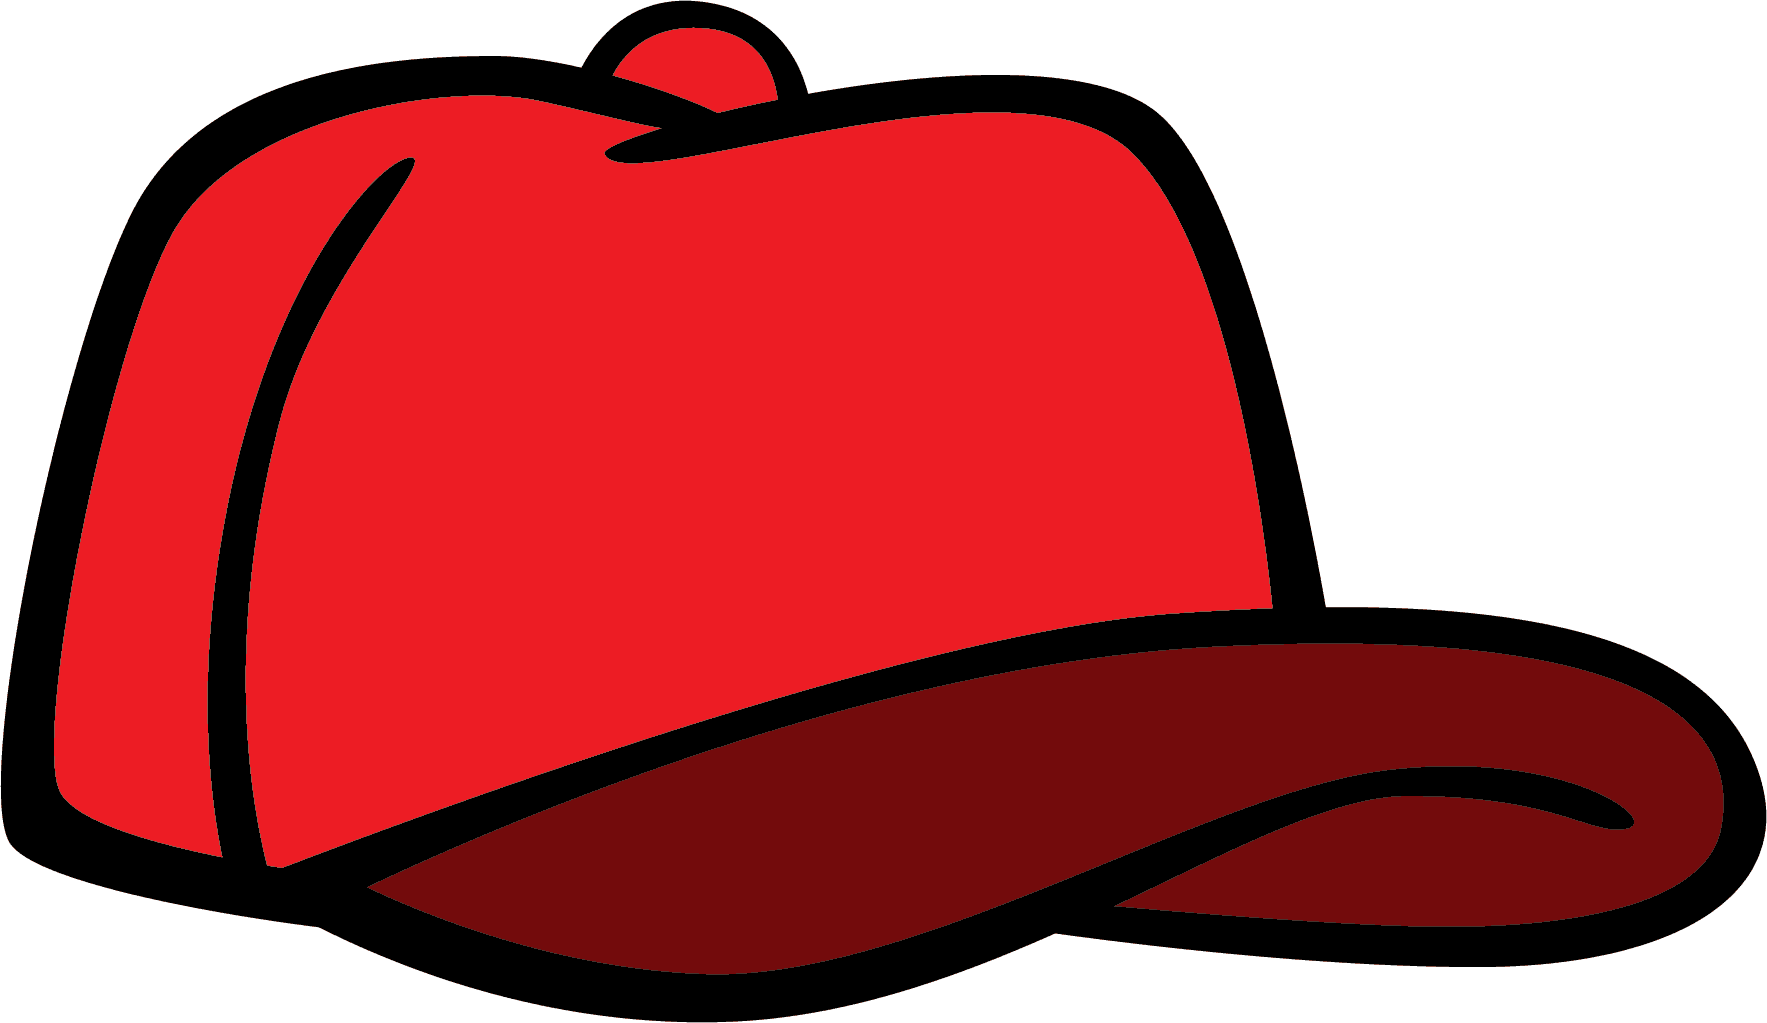 Hat Clipart this image as: